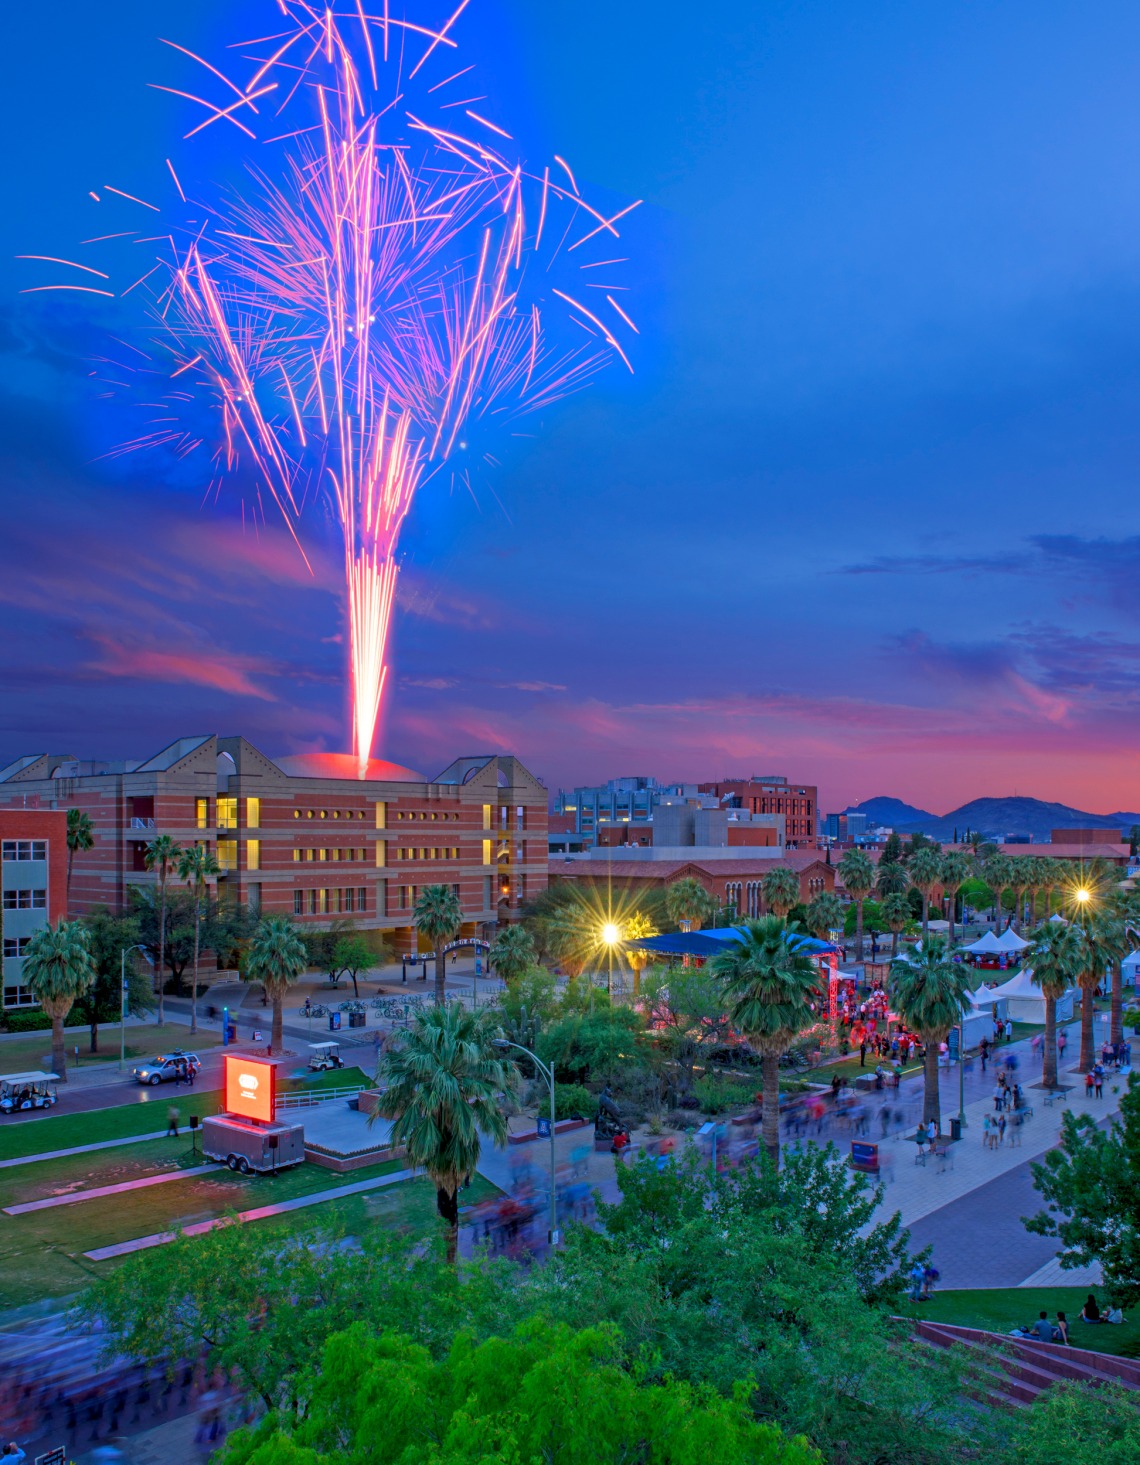 Fireworks off the roof of Koffler Building at sunset over the UA Mall to celebrate the launch of Arizona Now, the UA's capital fundraising campaign on April 11, 2014 Photographer Credit: J&L Photography